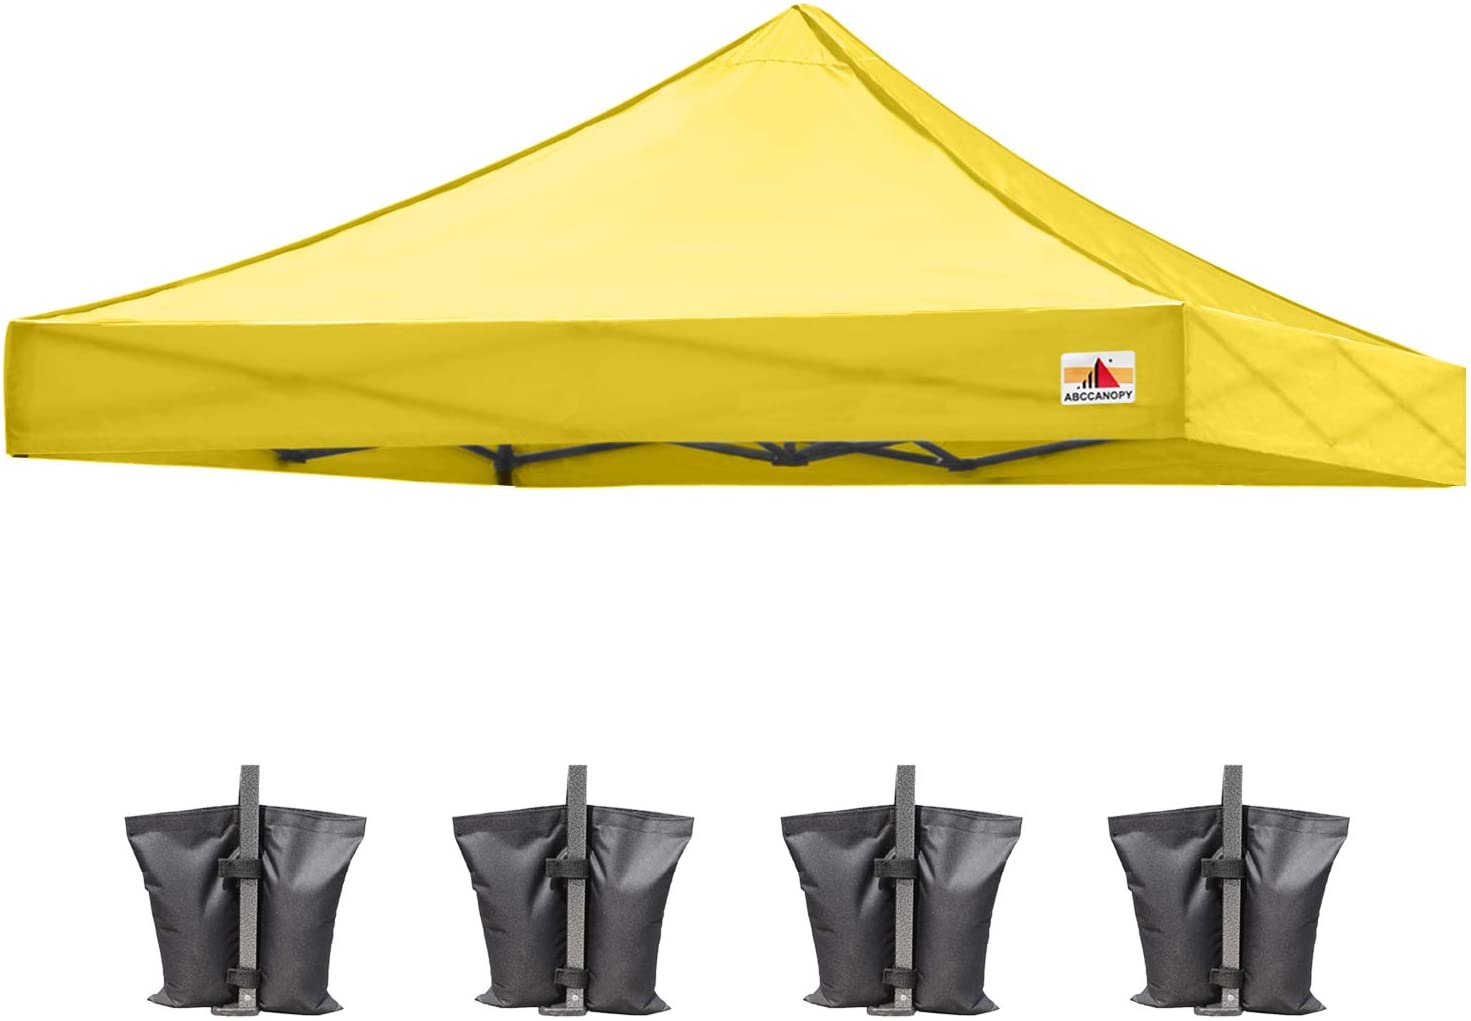 In this image, you can see the Yellow Canopy TOP tailored to perfectly fit the ABCCANOPY Commercial Deluxe 10x10 Canopy. Its bright white color provides a fresh and inviting look for your outdoor space.